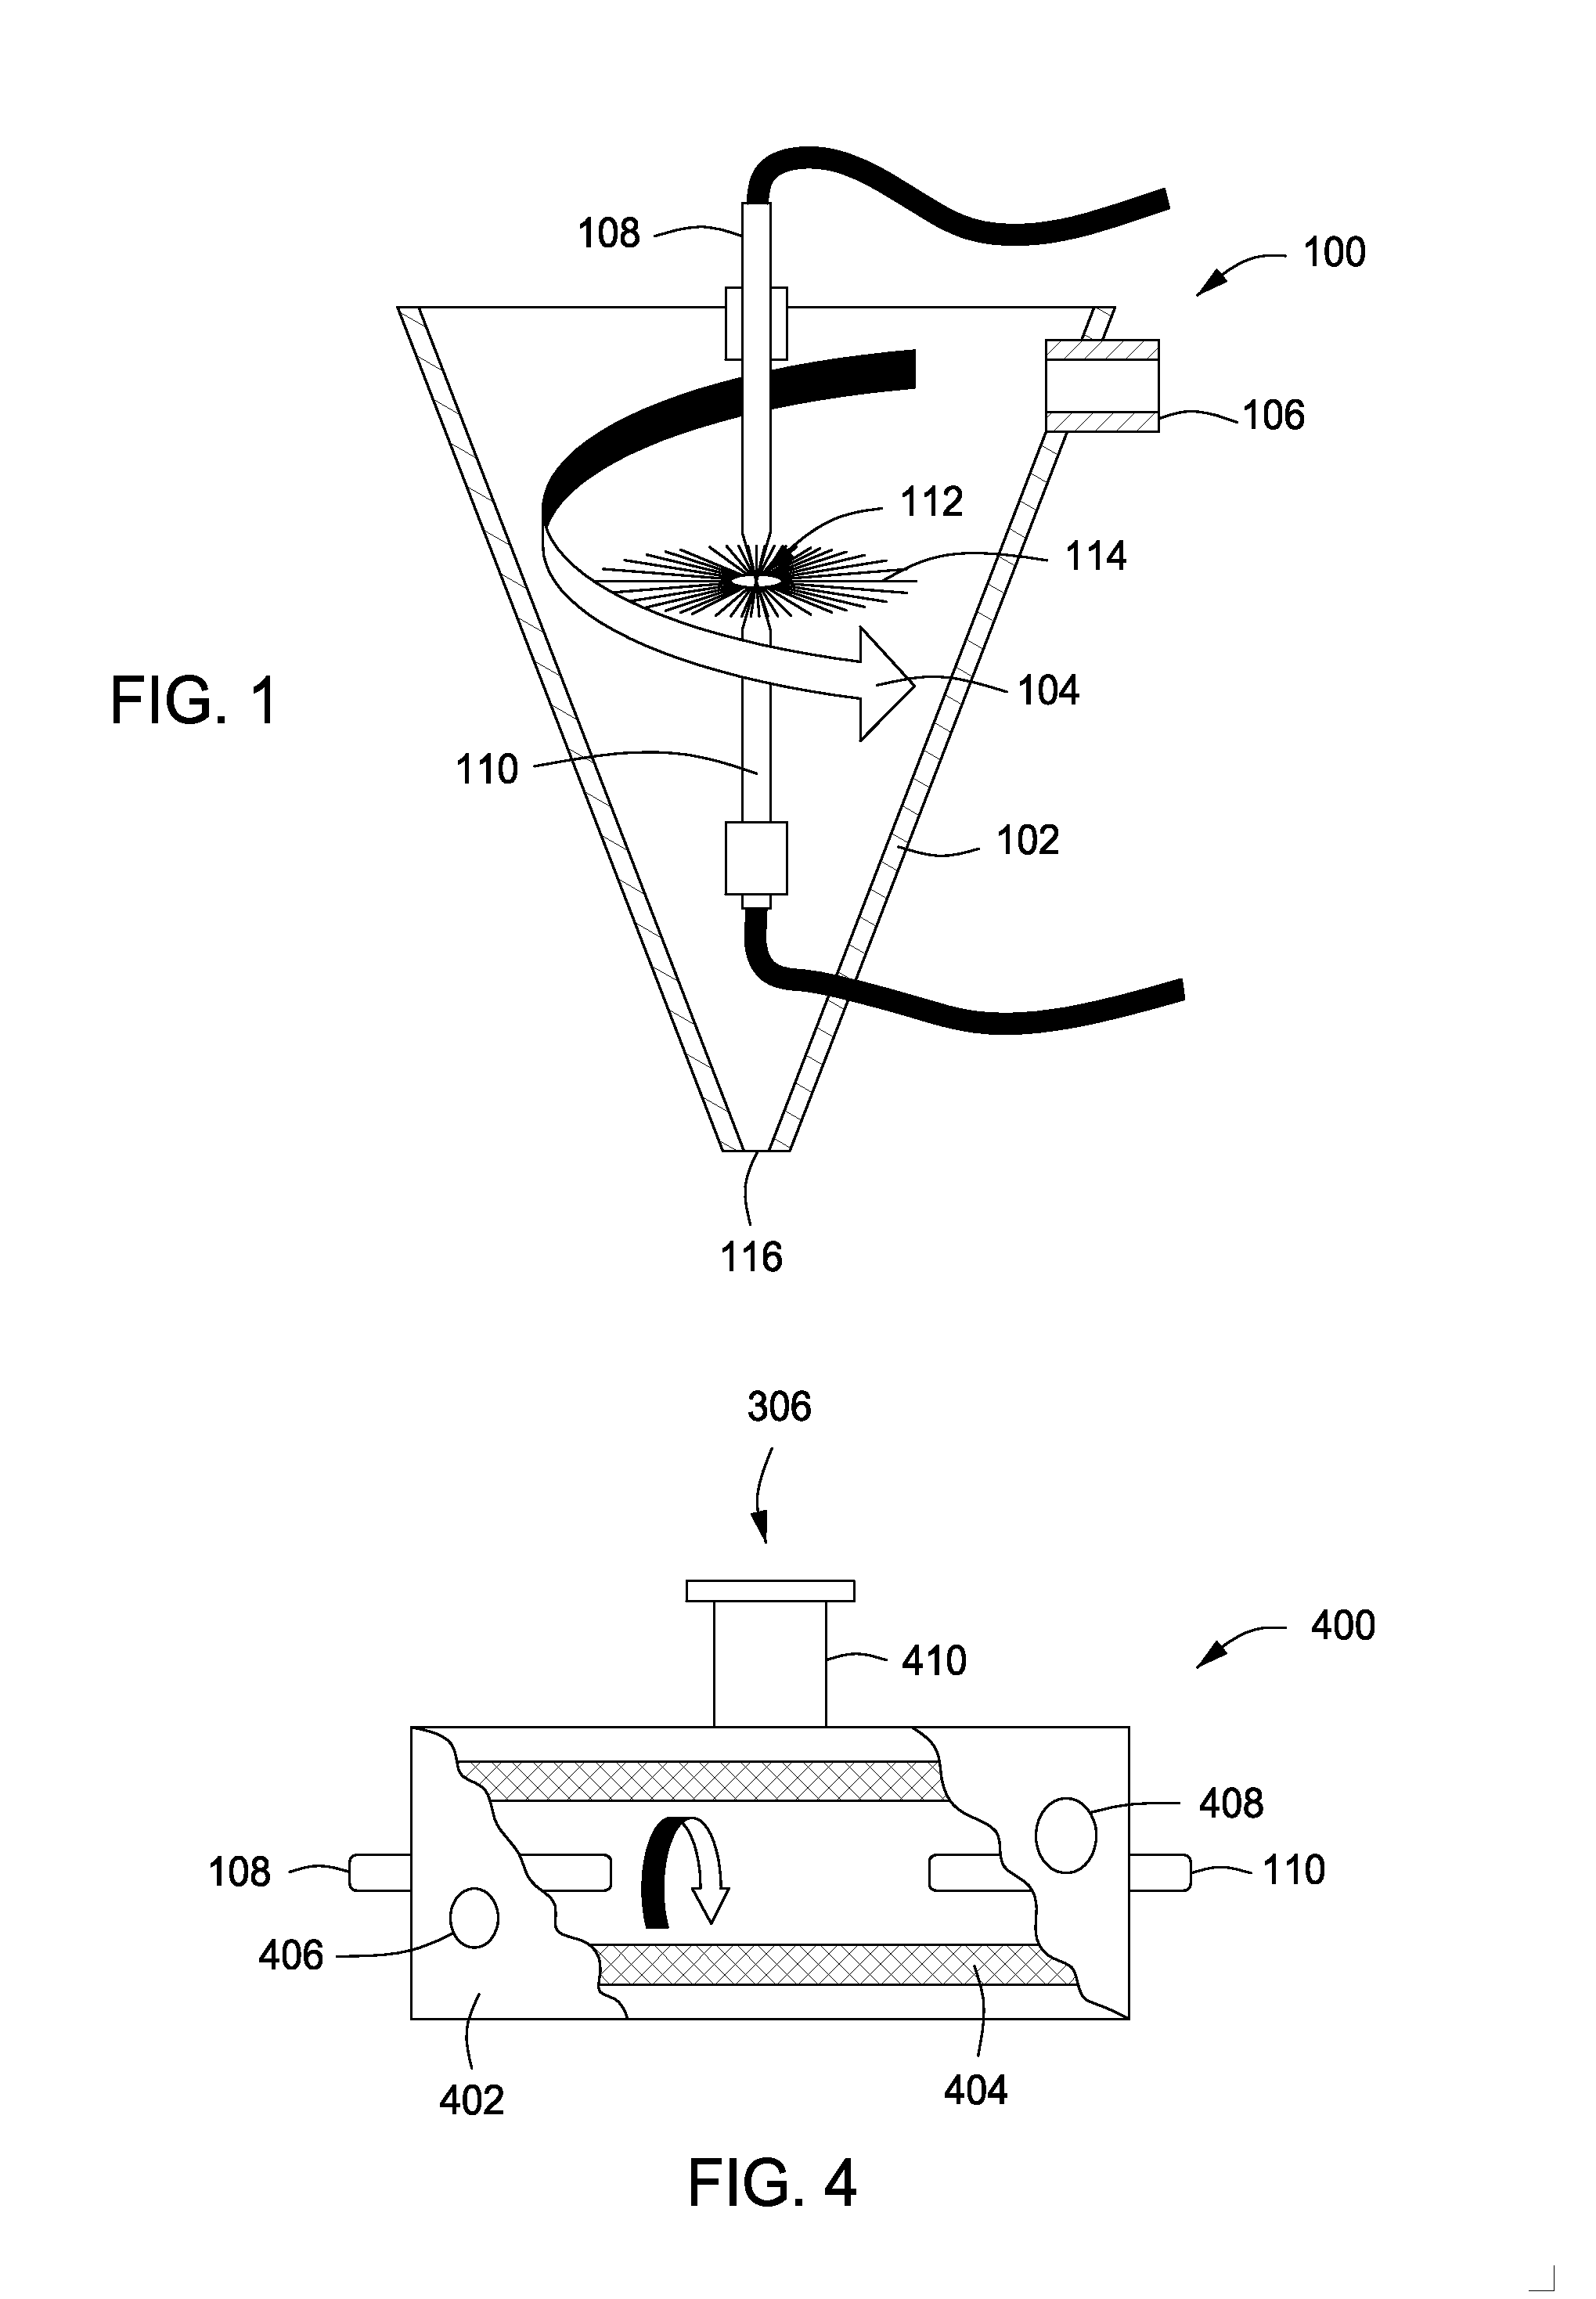 Apparatus for treating liquids with wave energy from an electrical arc